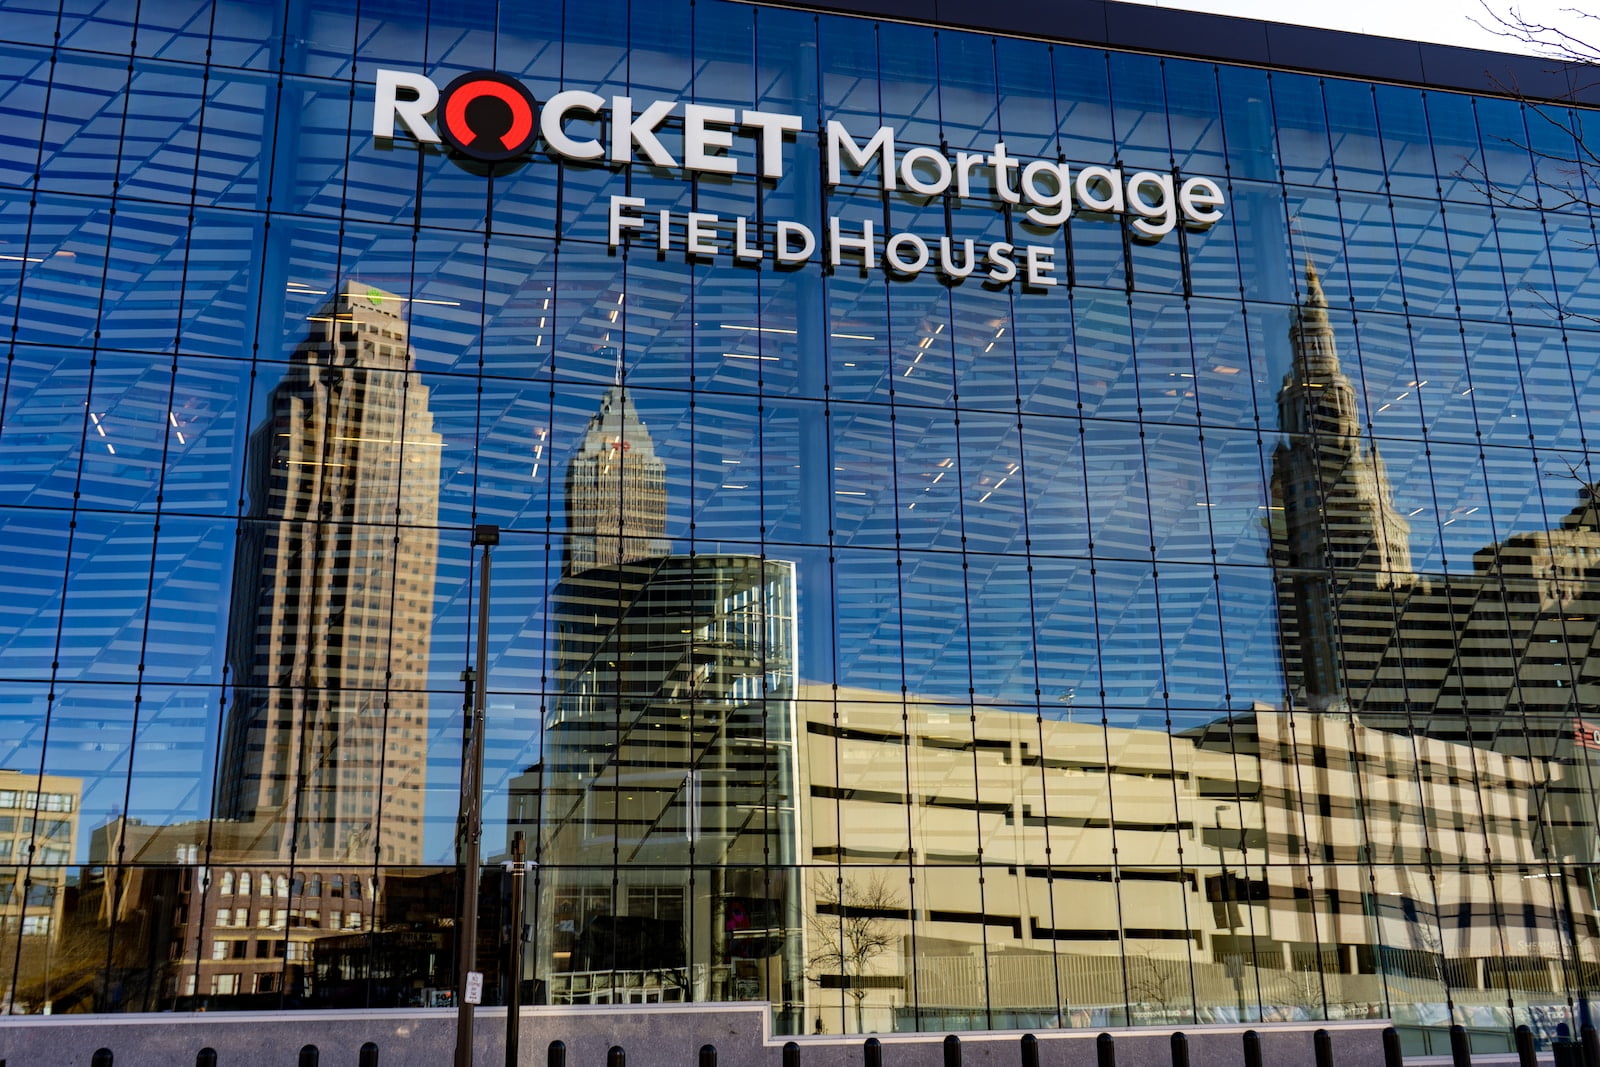 Rocket Mortgage Field House building